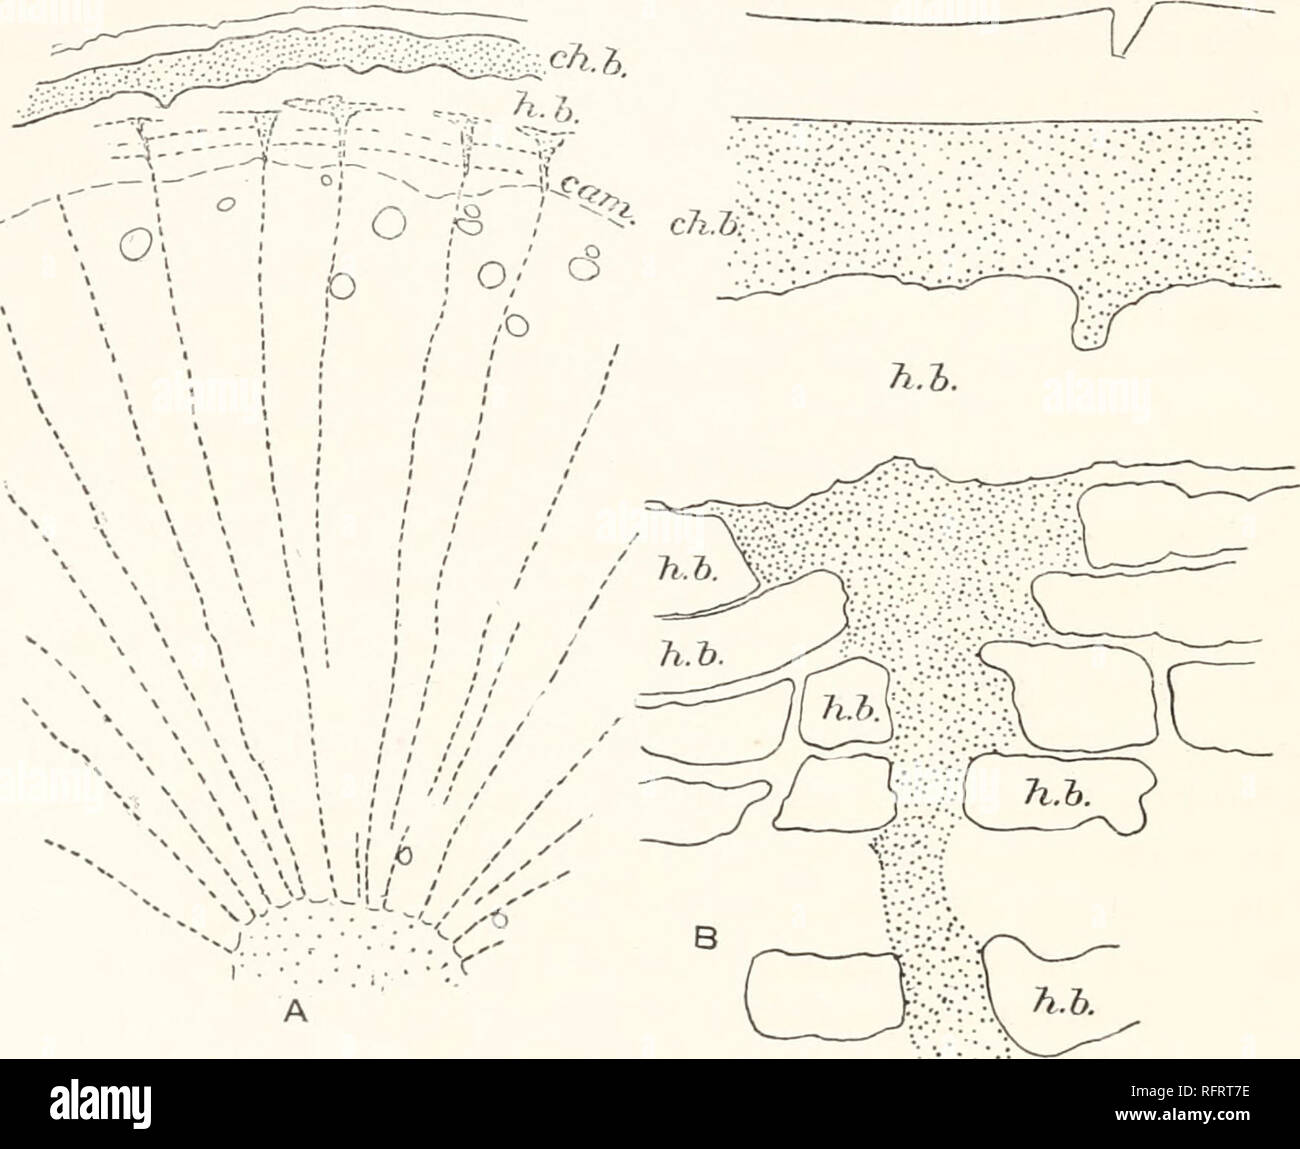 . Carnegie Institution of Washington publication. 26 TOPOGRAPHY OF CHLOROPHYLL APPARATUS IX DESERT PLANTS. PROSOPIS VELUTINA. (Figs. 12, 13, and 14.) Prosopis L'dutina is the most characteristic tree of the river-bottoms, where in places it forms extensive forests. It varies in size from a small shrub to a well-formed and shapely tree 15 m. or more high. The difference in size depends mainly on the lack or the abundance of the water-supply. Leaves are formed in the spring and are shed in the autumn with a regu- laritv characteristic of deciduous trees of more humid regions.. FIG. 12.—Prosopis  Stock Photo